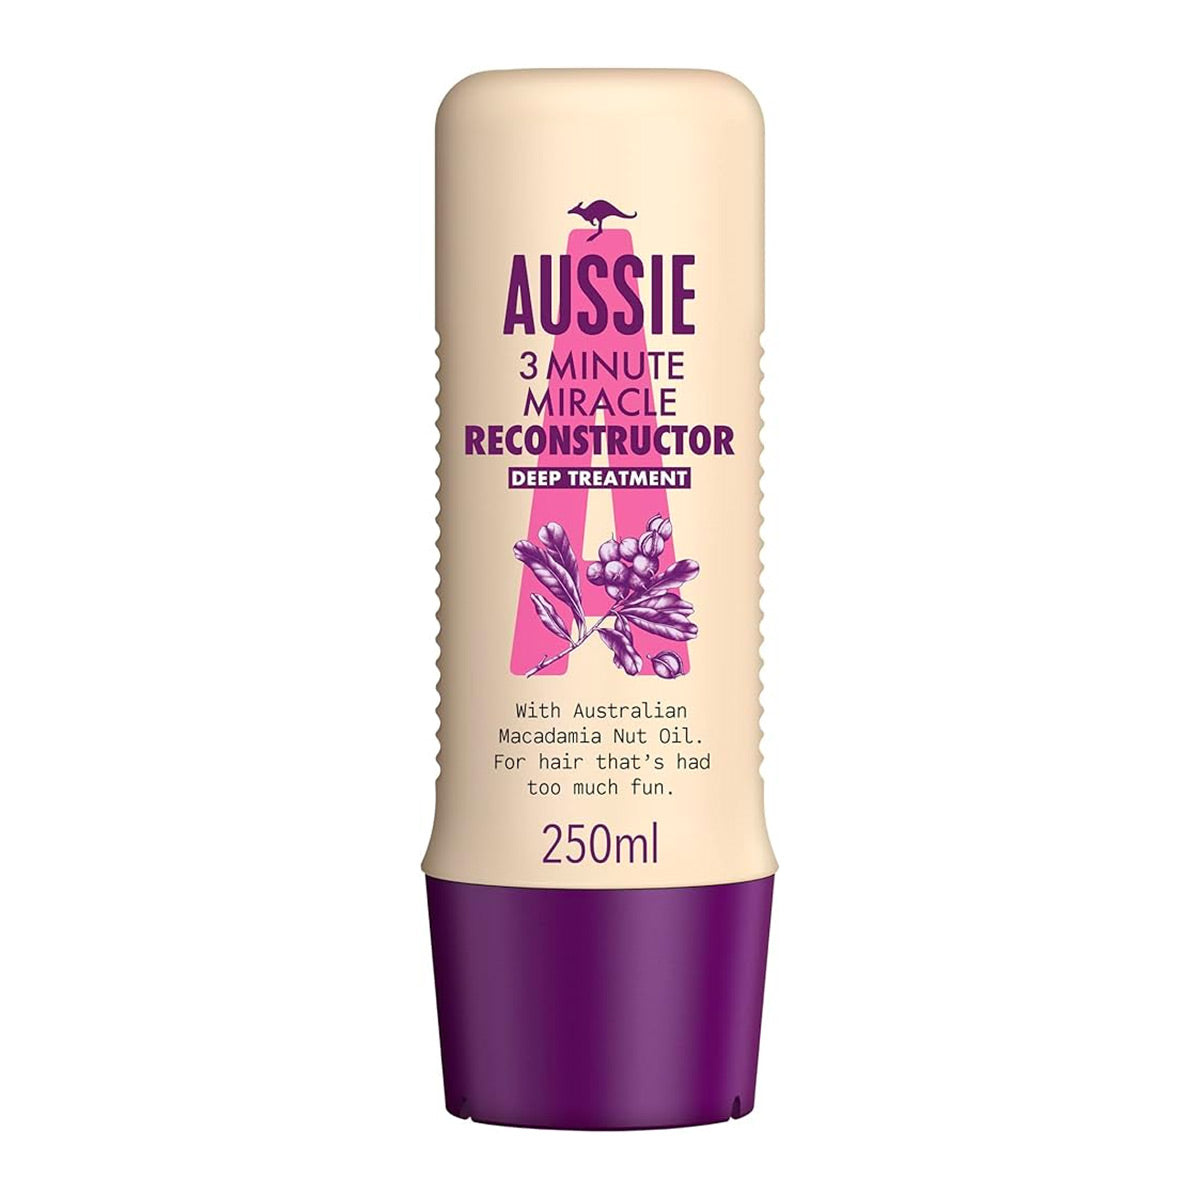 Aussie 3 Minute Miracle Reconstructor Deep Treatment With Australian Macadamia Nut Oil 250 ml